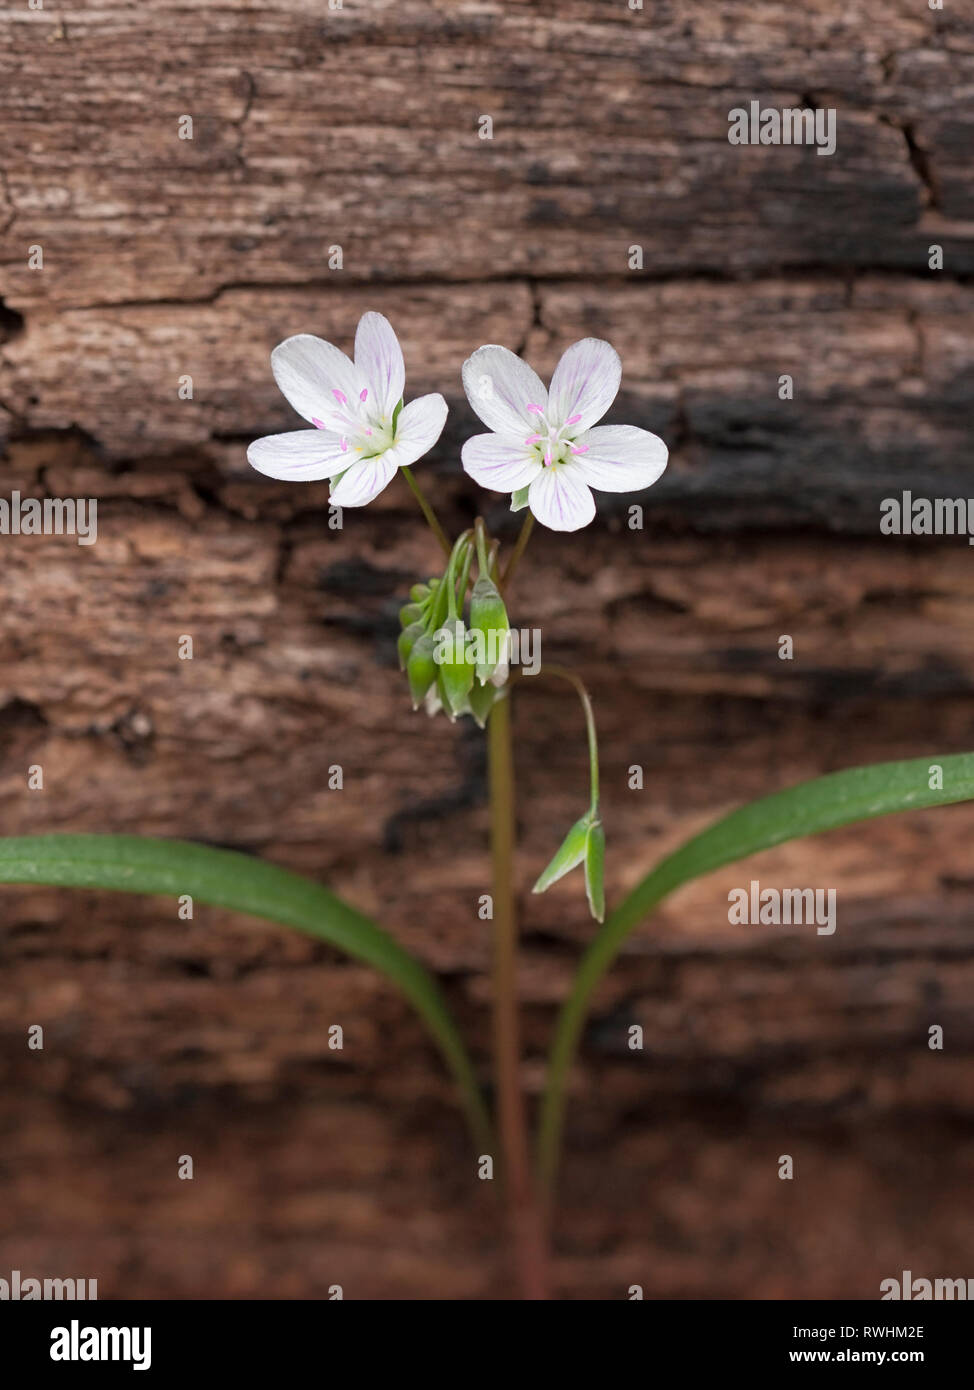 A solitary spring beauty sprouts two flowers from its stem. Growing next to a burnt fallen tree, its pink and white colors dazzle the eye. Stock Photo